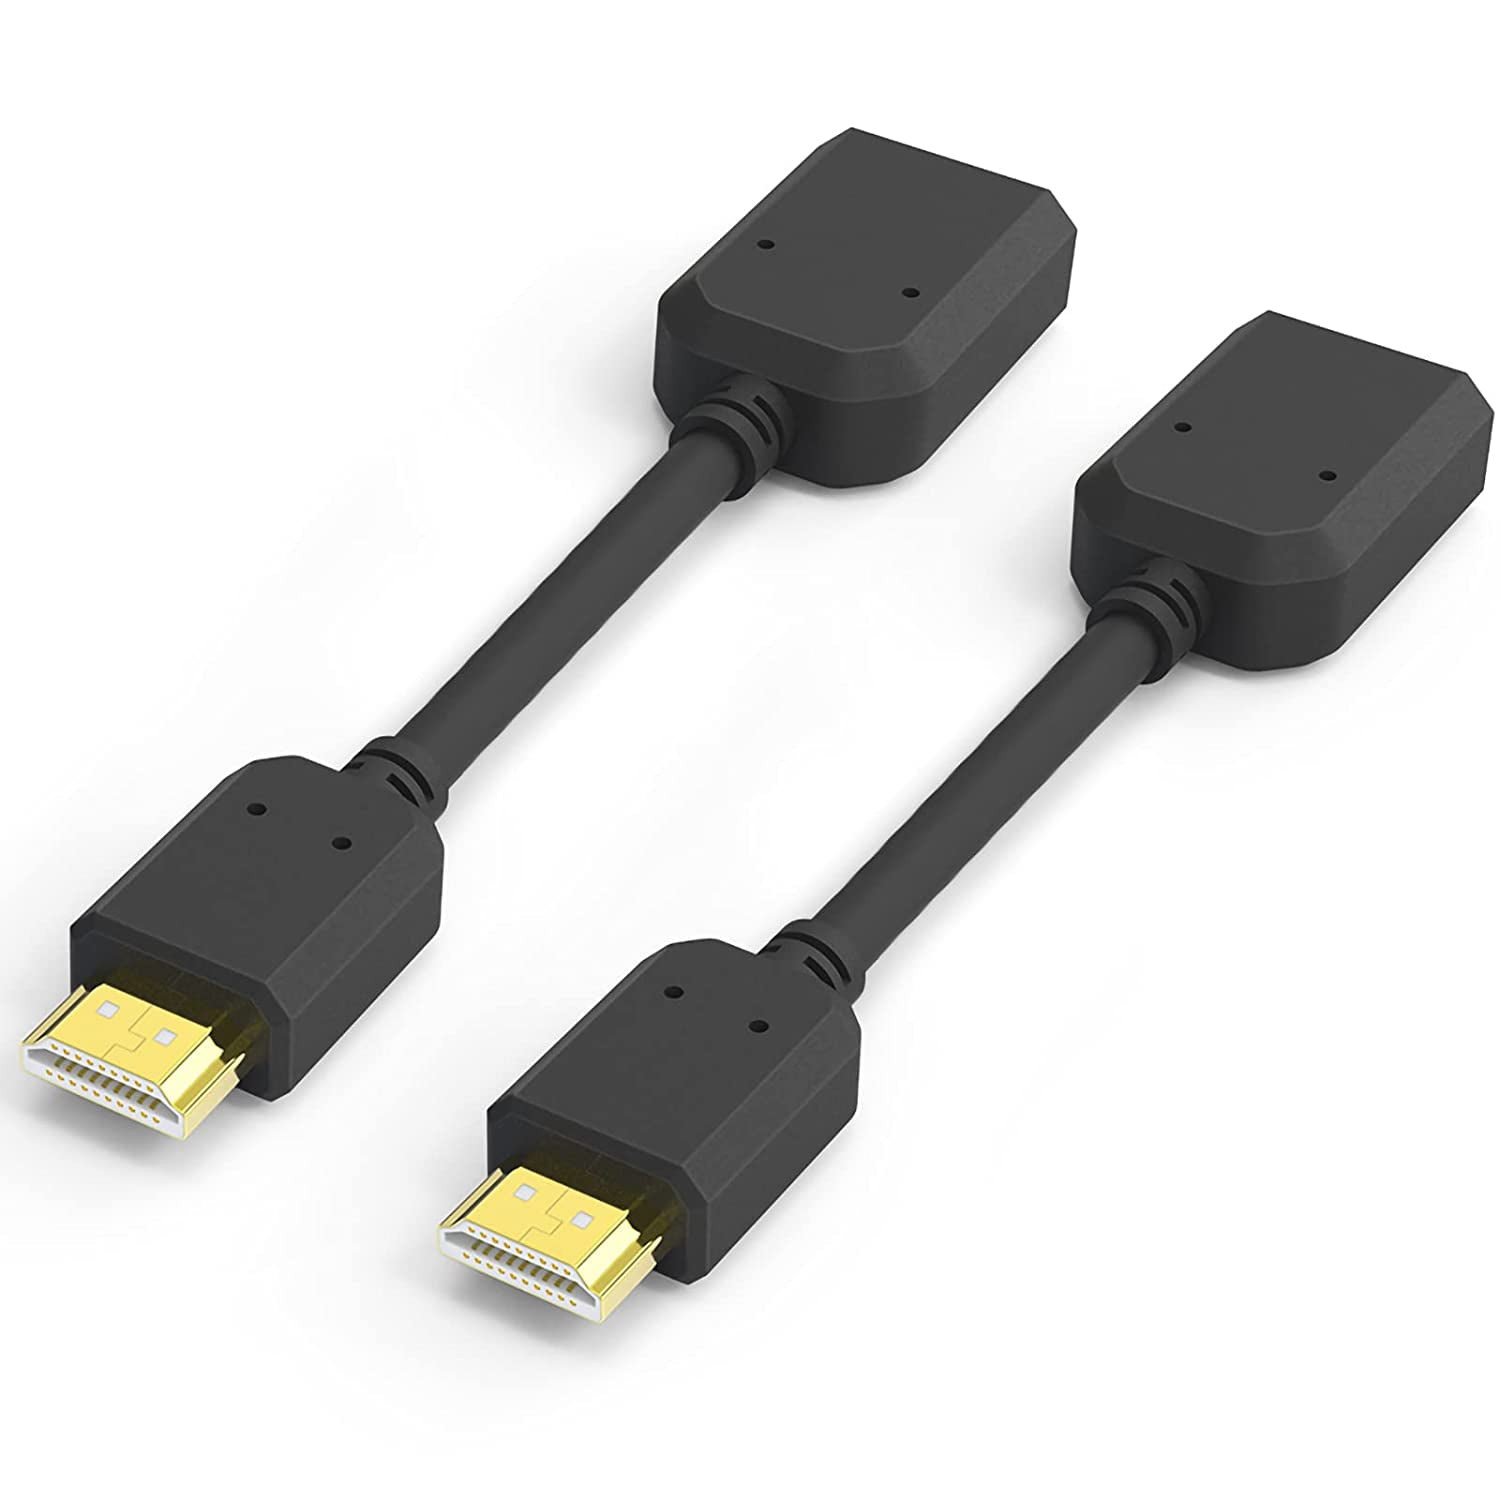 HDMI Extension Cable, 2-Pack High Speed HDMI Male to Female Extender Adapter Converter Support & 3D 1080P for Google Chrome Cast, Roku Stick, TV Stick, PS3/4, Xbox360, Laptop and PC